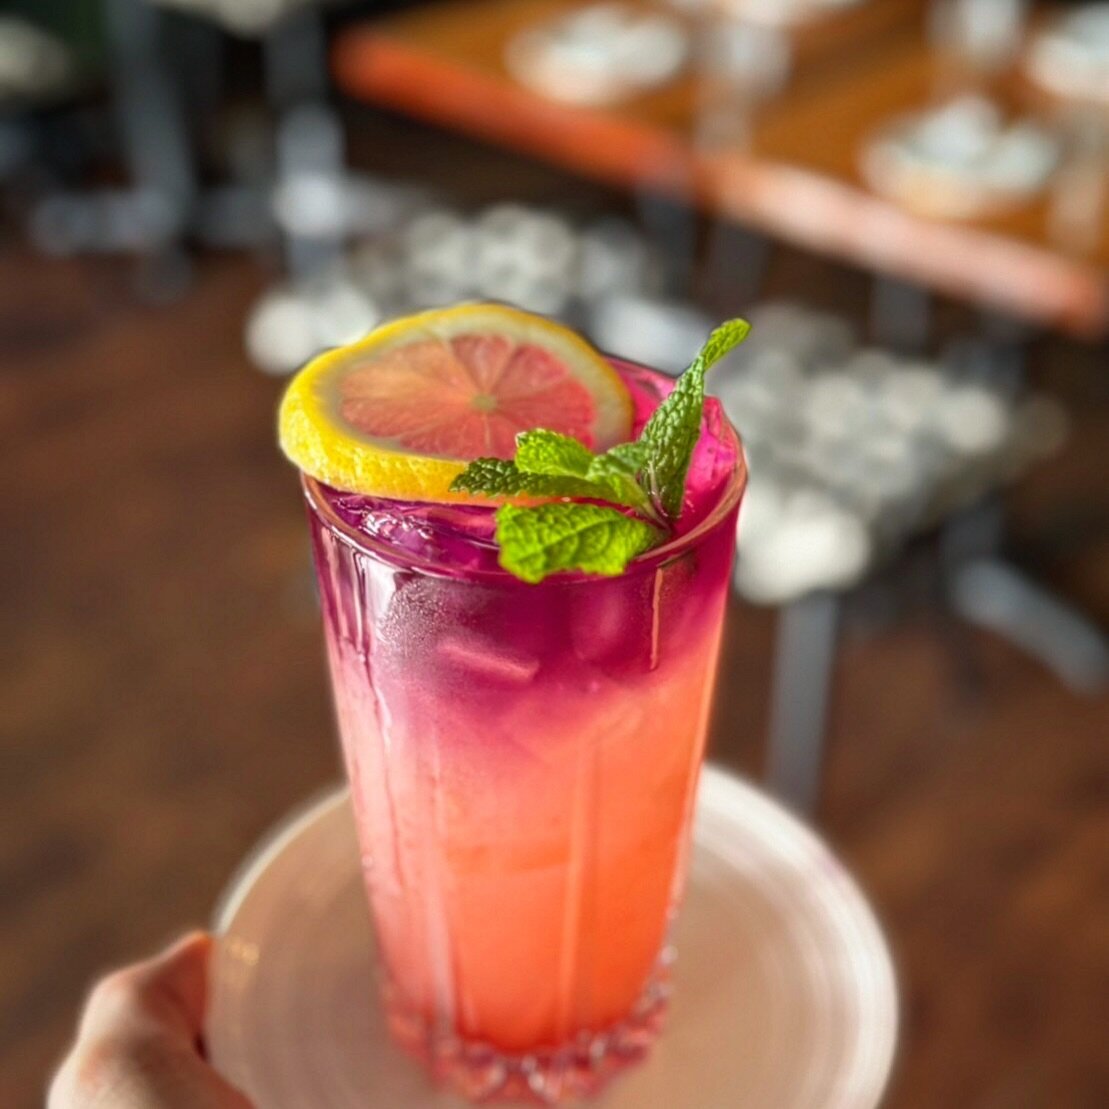 Come on over and give our Butterfly Pea strawberry lemonade a try 🍋🍓🪻, you won&rsquo;t be disappointed!

This drink is lightly sweetened to balance out the tartness of the lemonade, making it a refreshing and satisfying beverage that you can enjoy